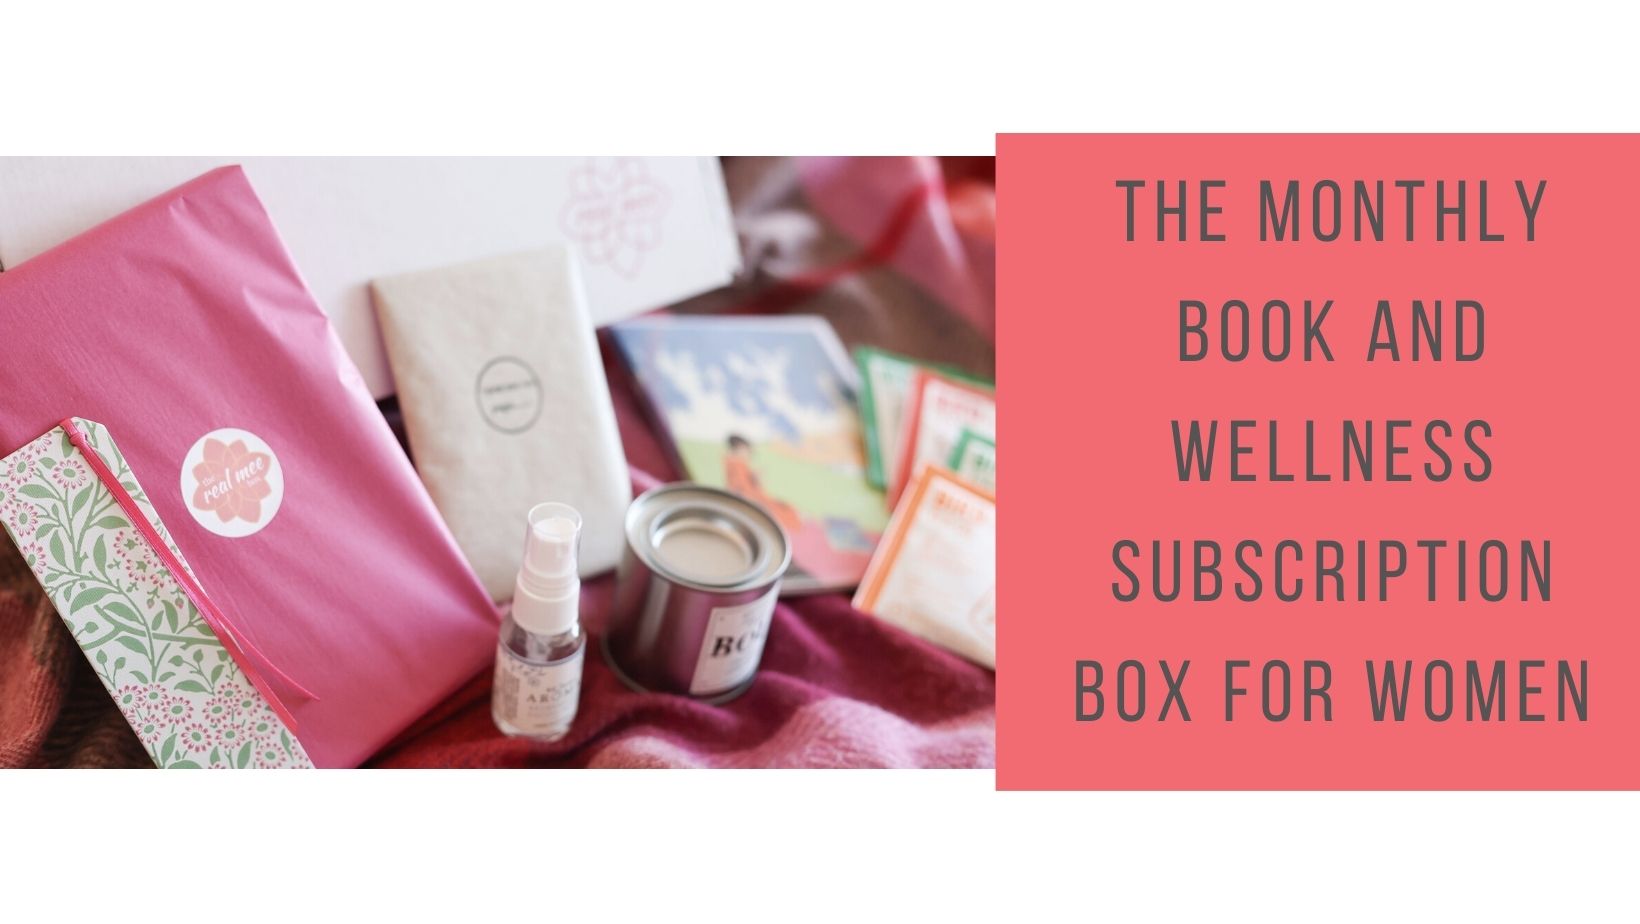 The monthly book and wellness subscription box for women